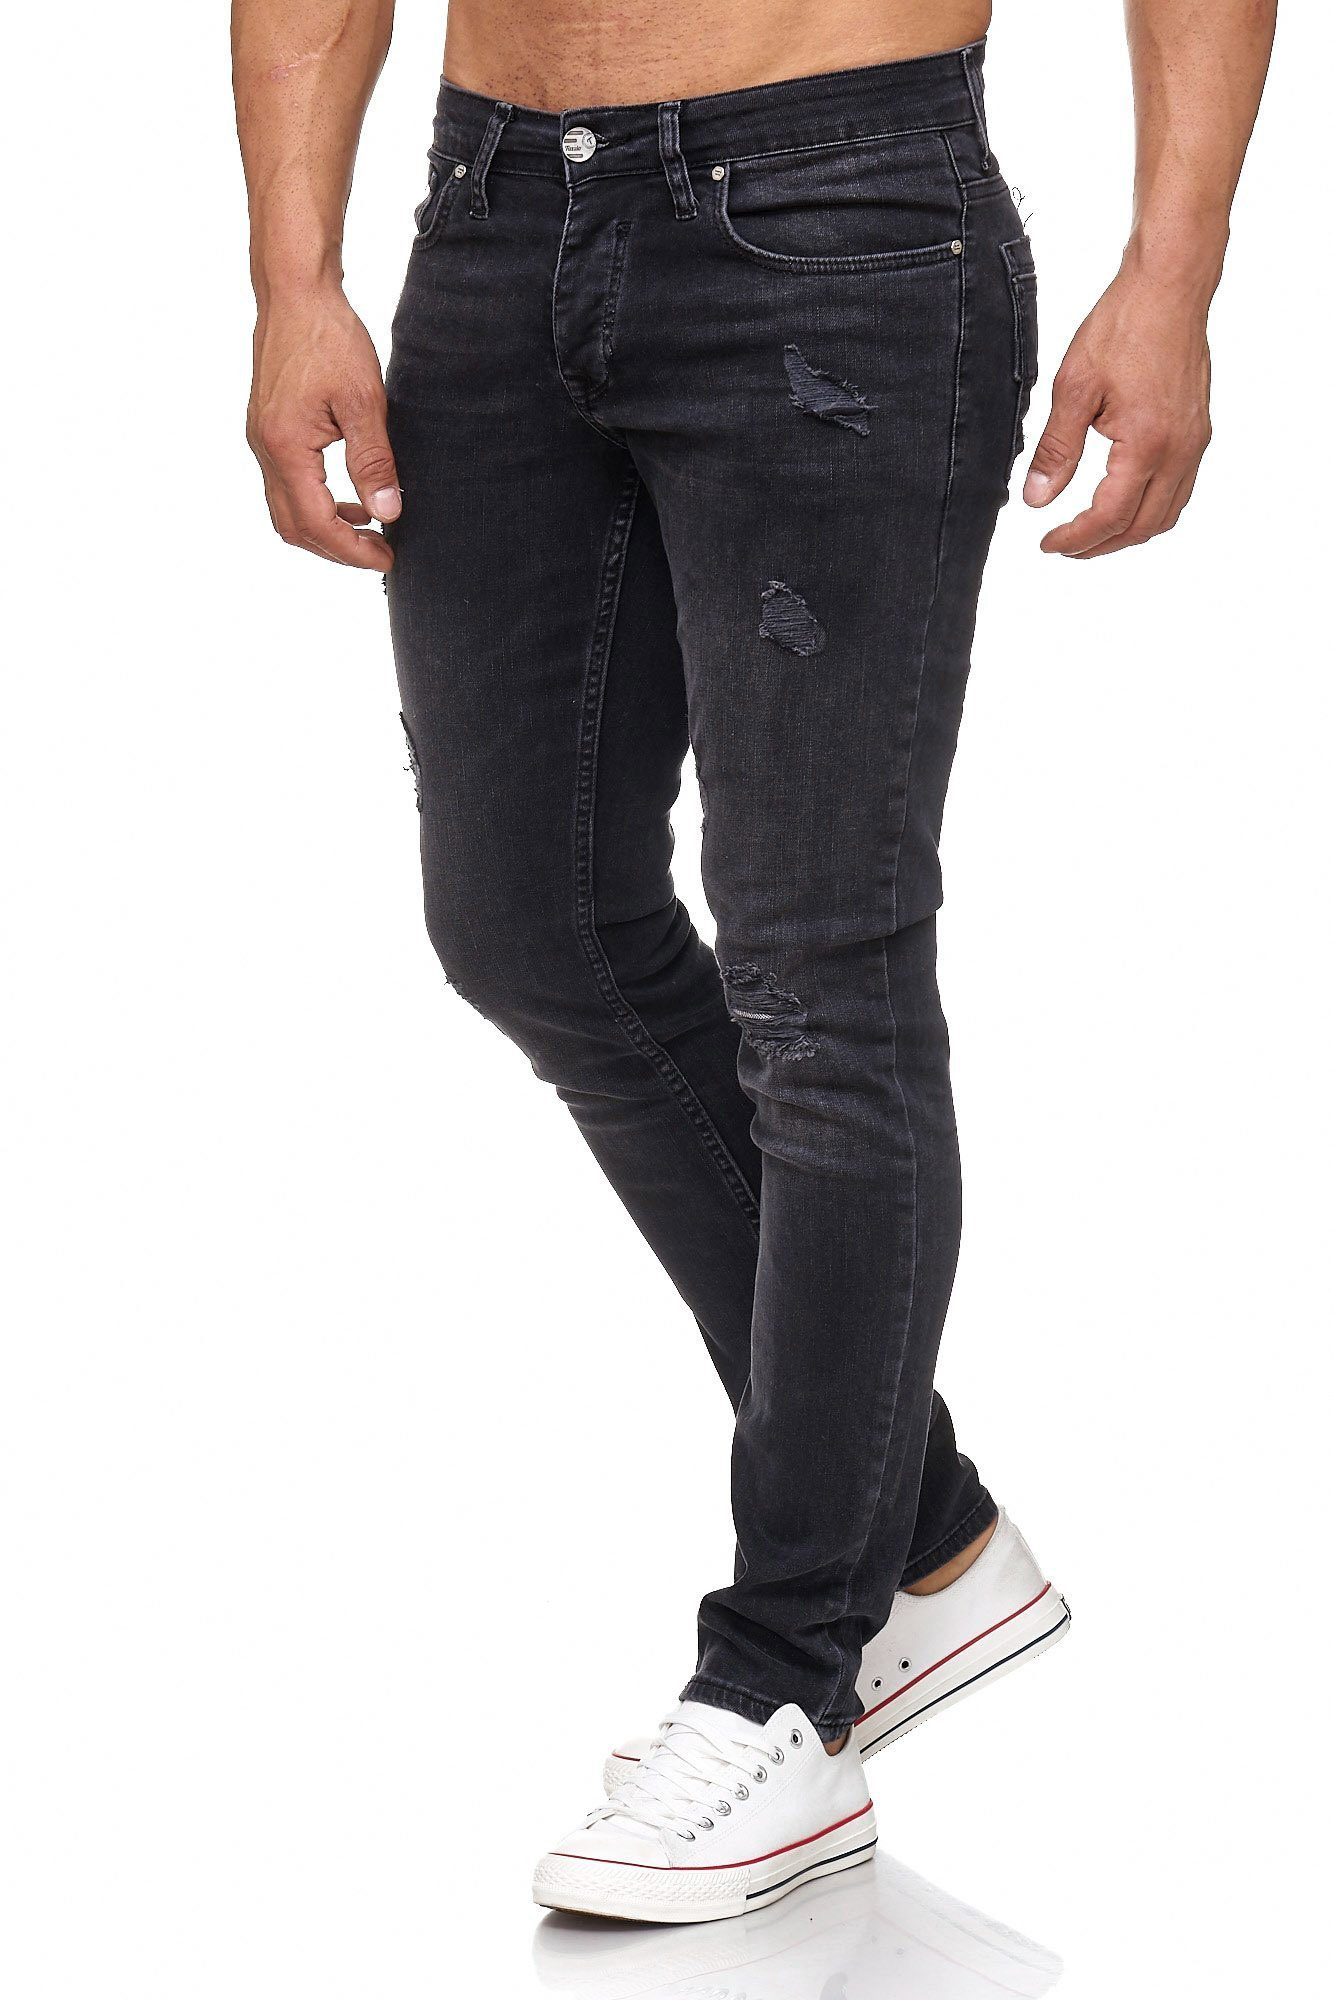 Destroyed Jeans online kaufen » Ripped Jeans | OTTO